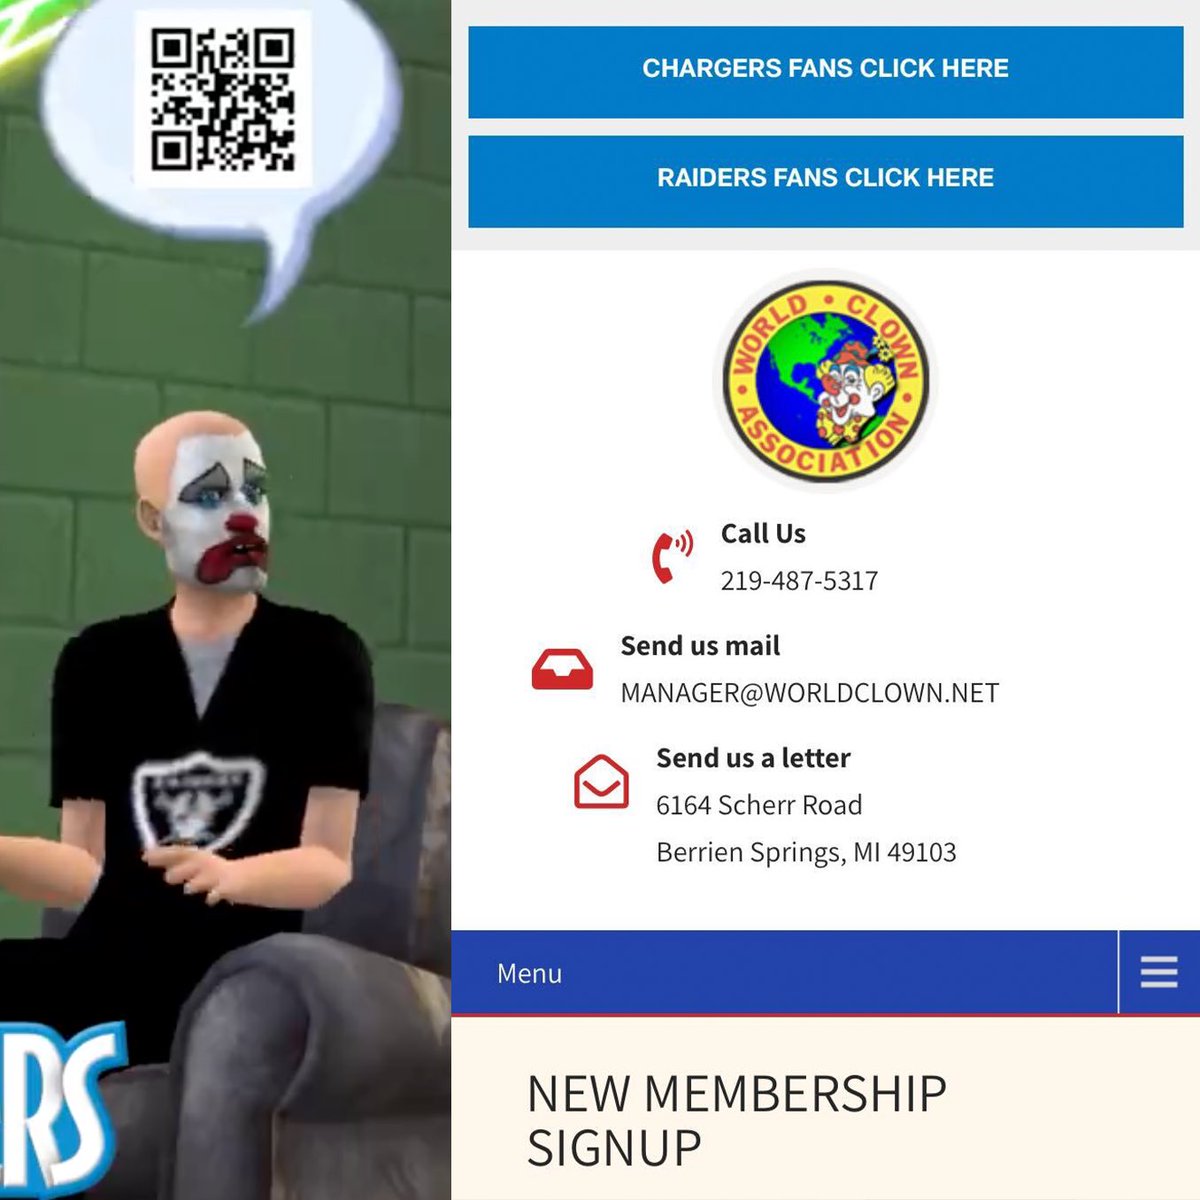 The Chargers included a QR code to send Raiders fans to signup for the World Clown Association 😂😭